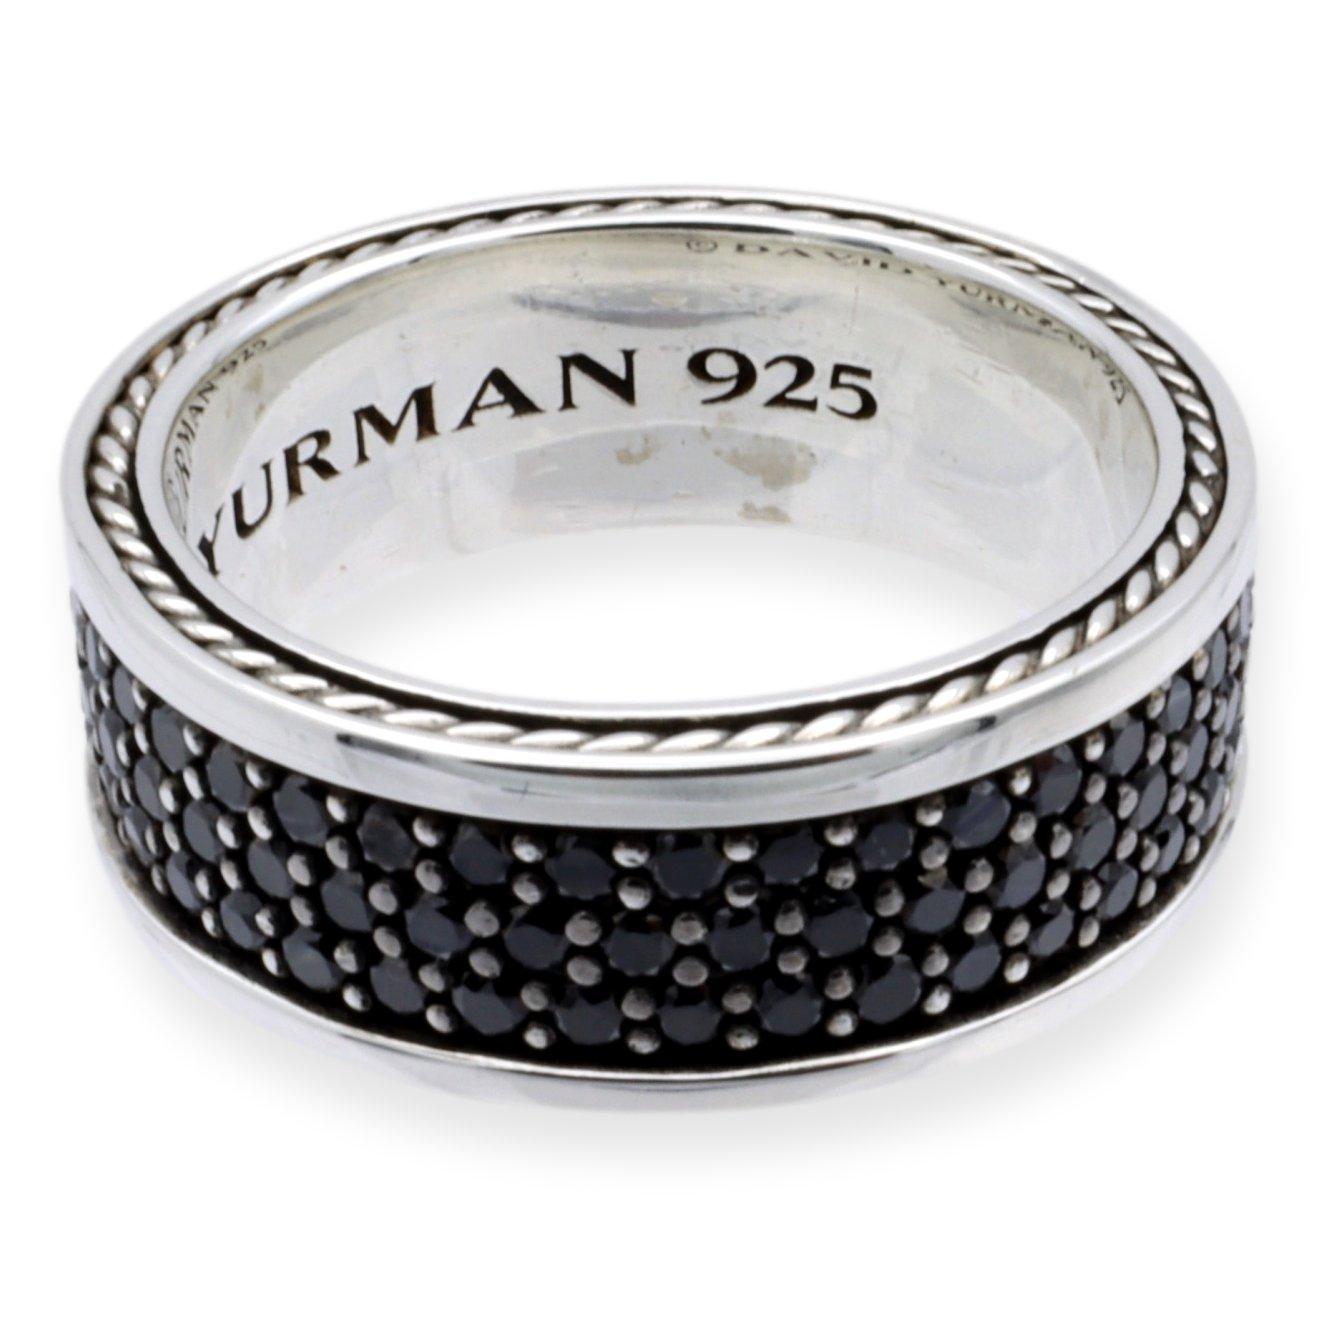 David Yurman wide men's ring from the Streamline collection finely crafted in sterling silver featuring three rows of pave set round brilliant black diamonds weighing 1.95 carats total weight. Band measures 8.5 mm wide. Fully hallmarked with logo